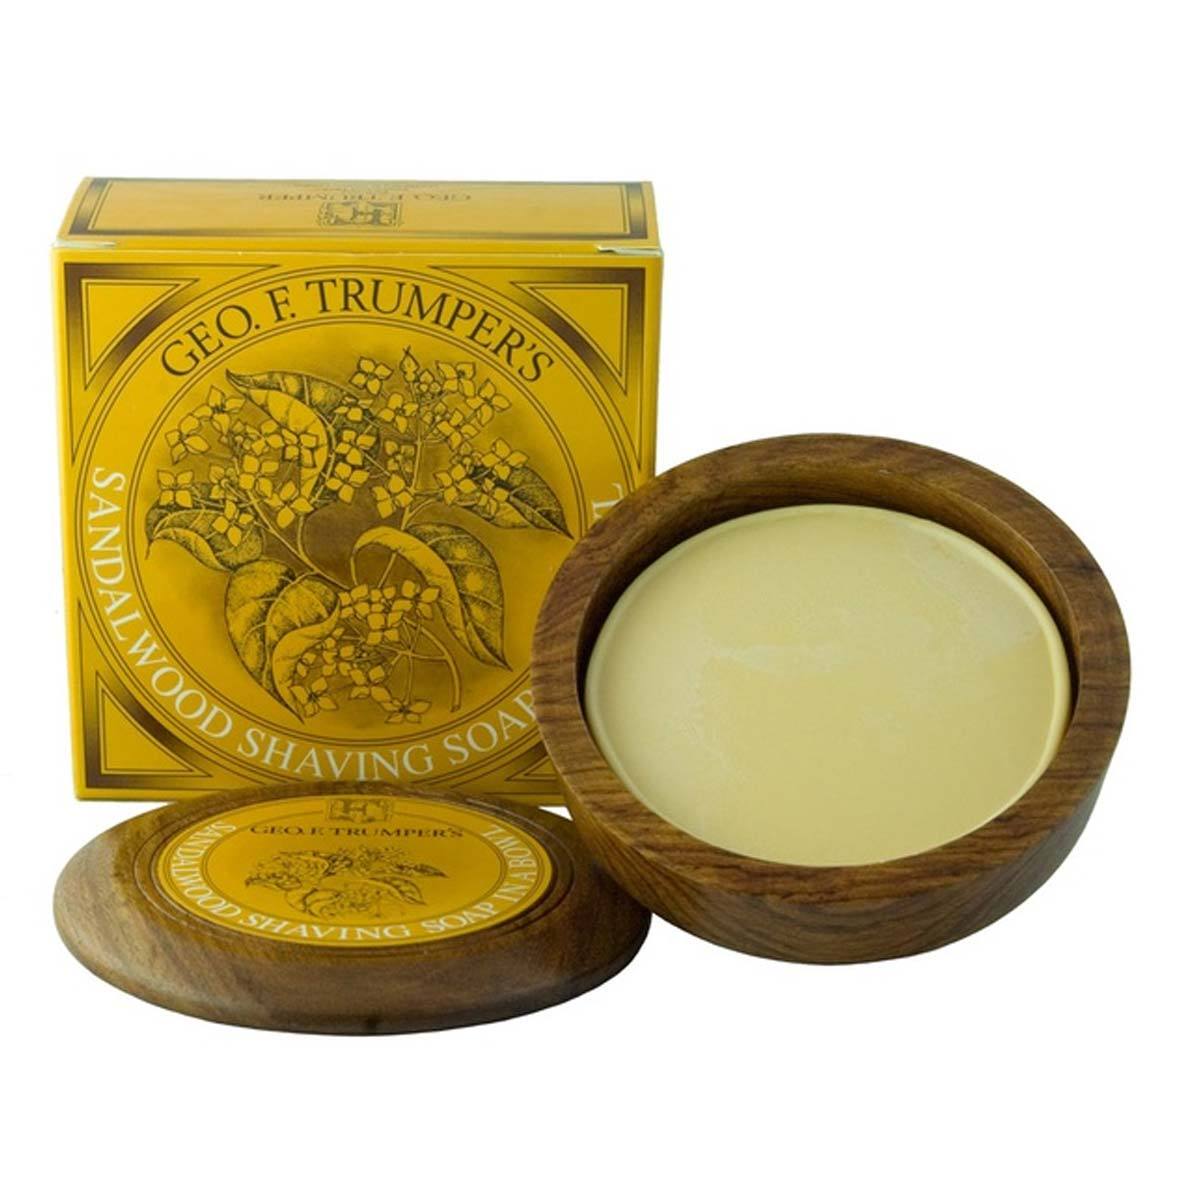 Primary image of Sandalwood Shave Soap with Wood Bowl